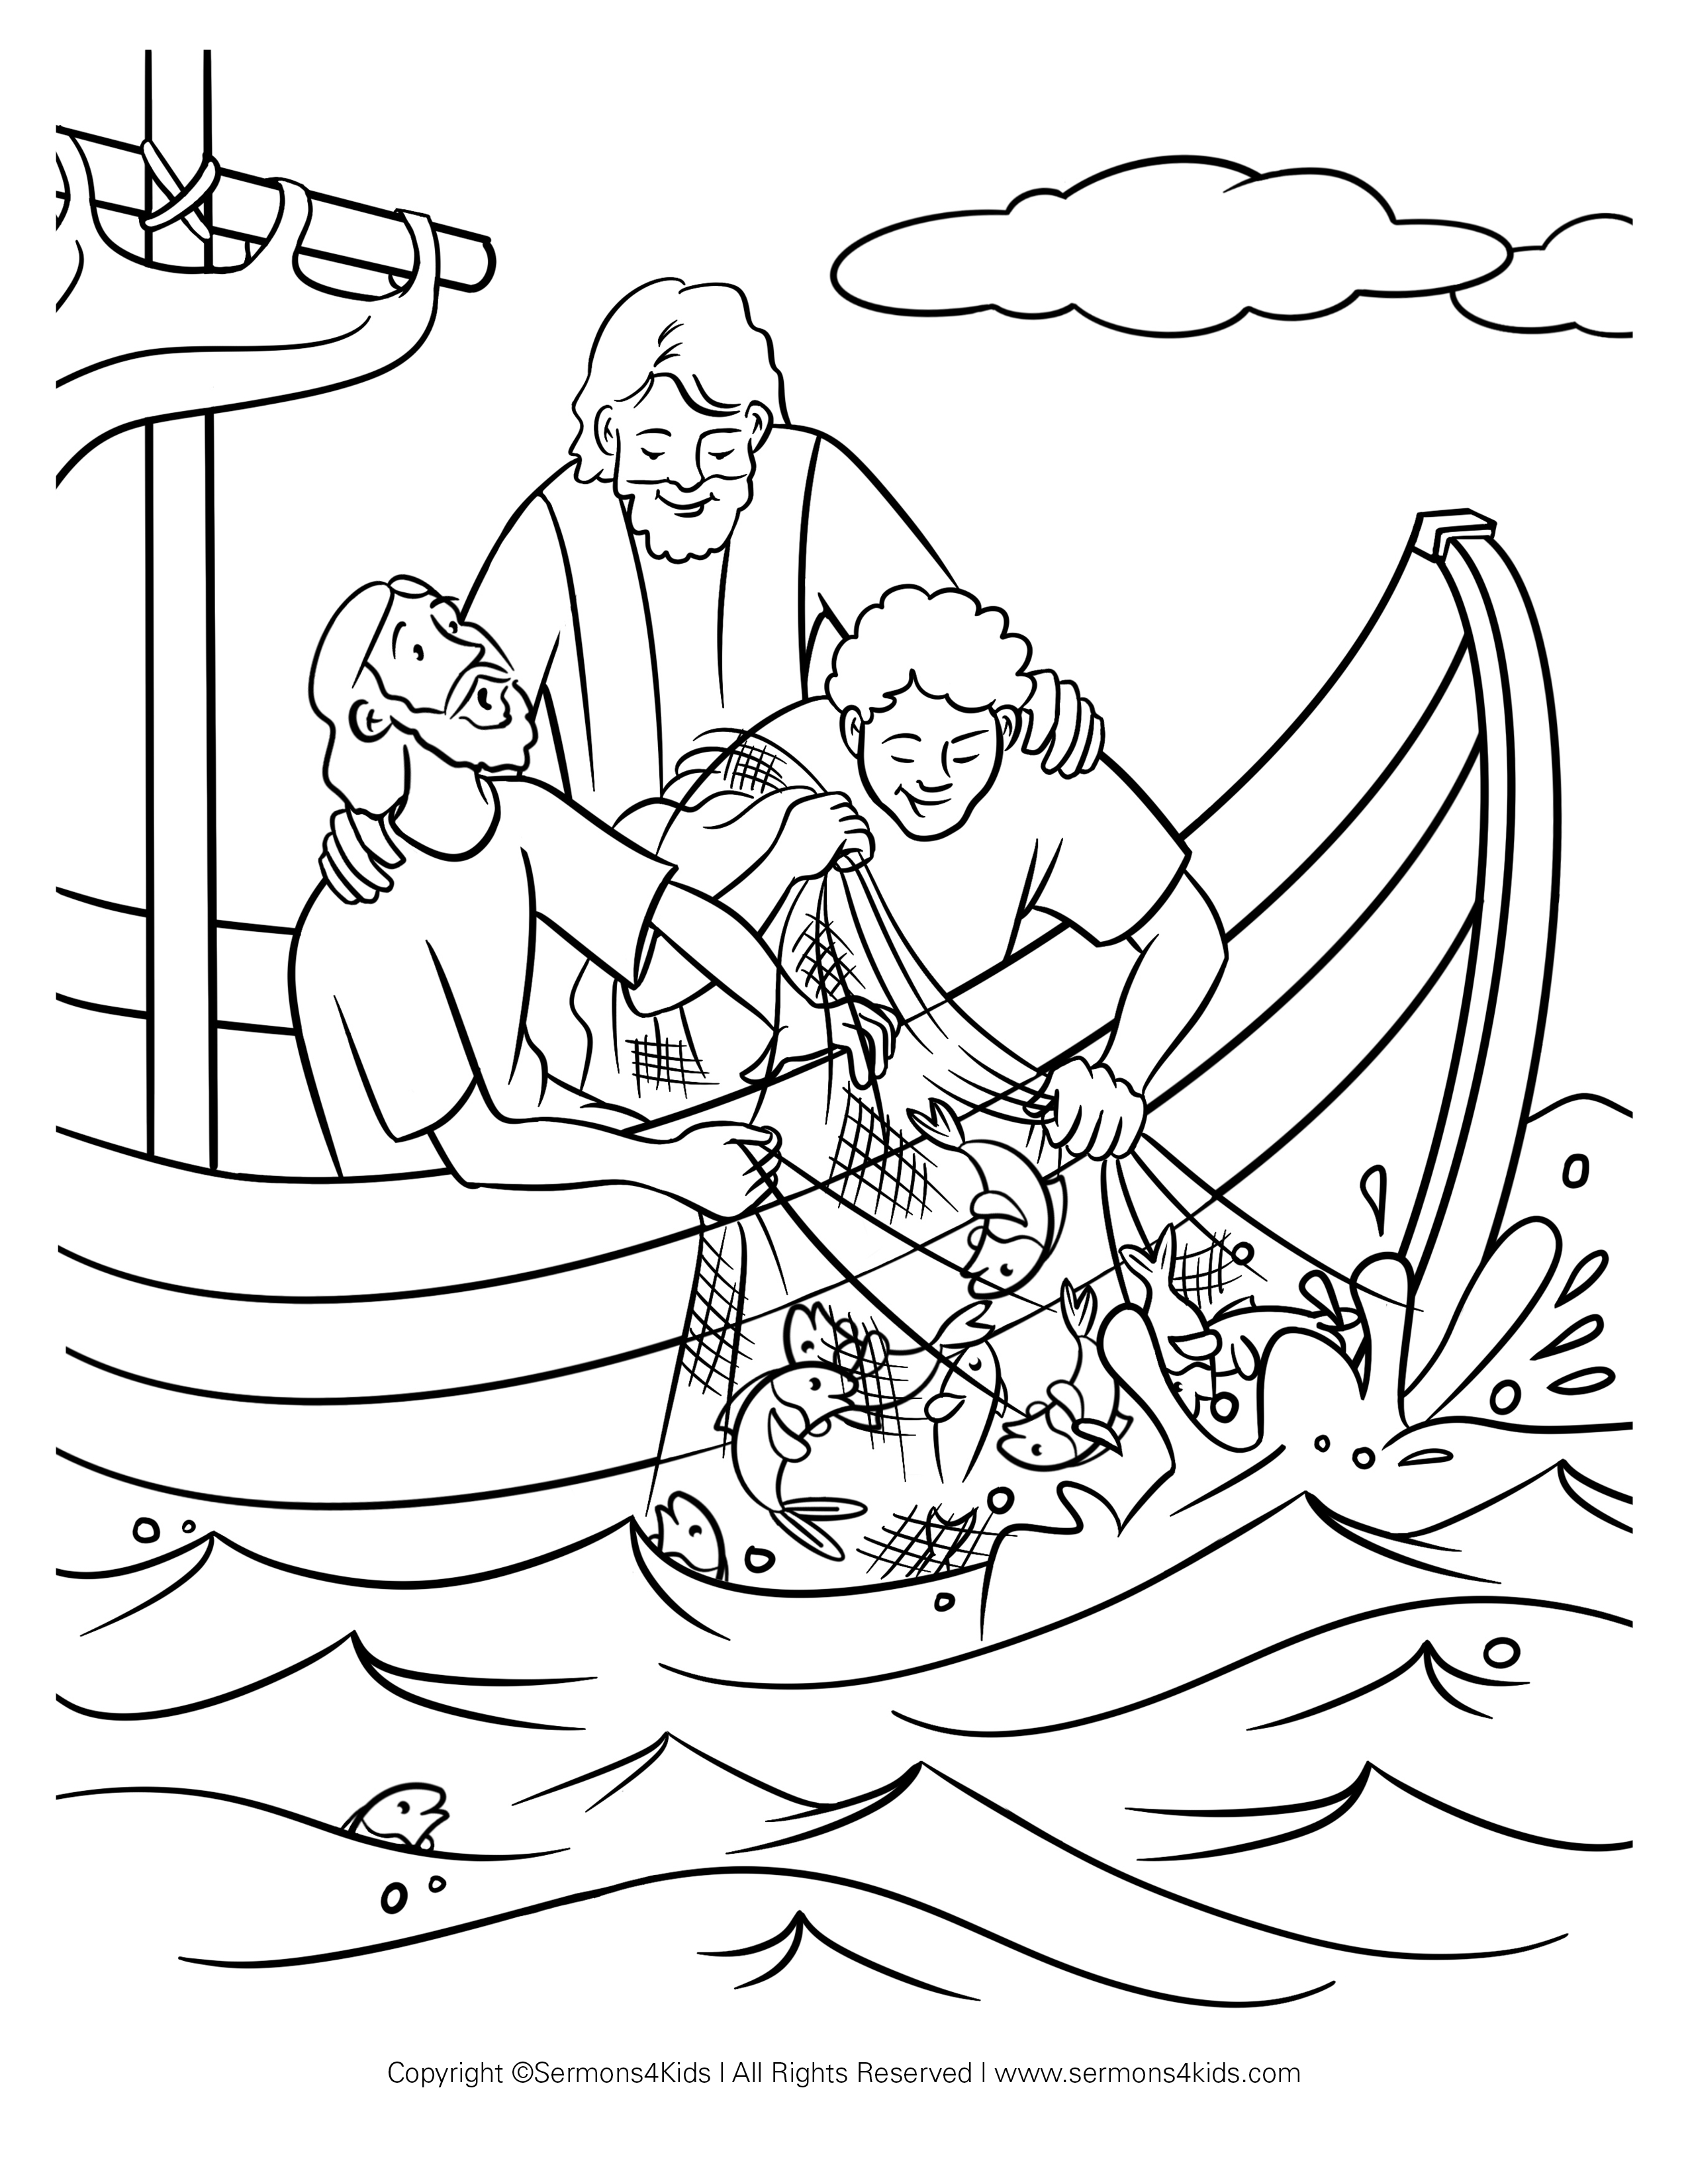 Jesus helps catch fish childrens sermons from se